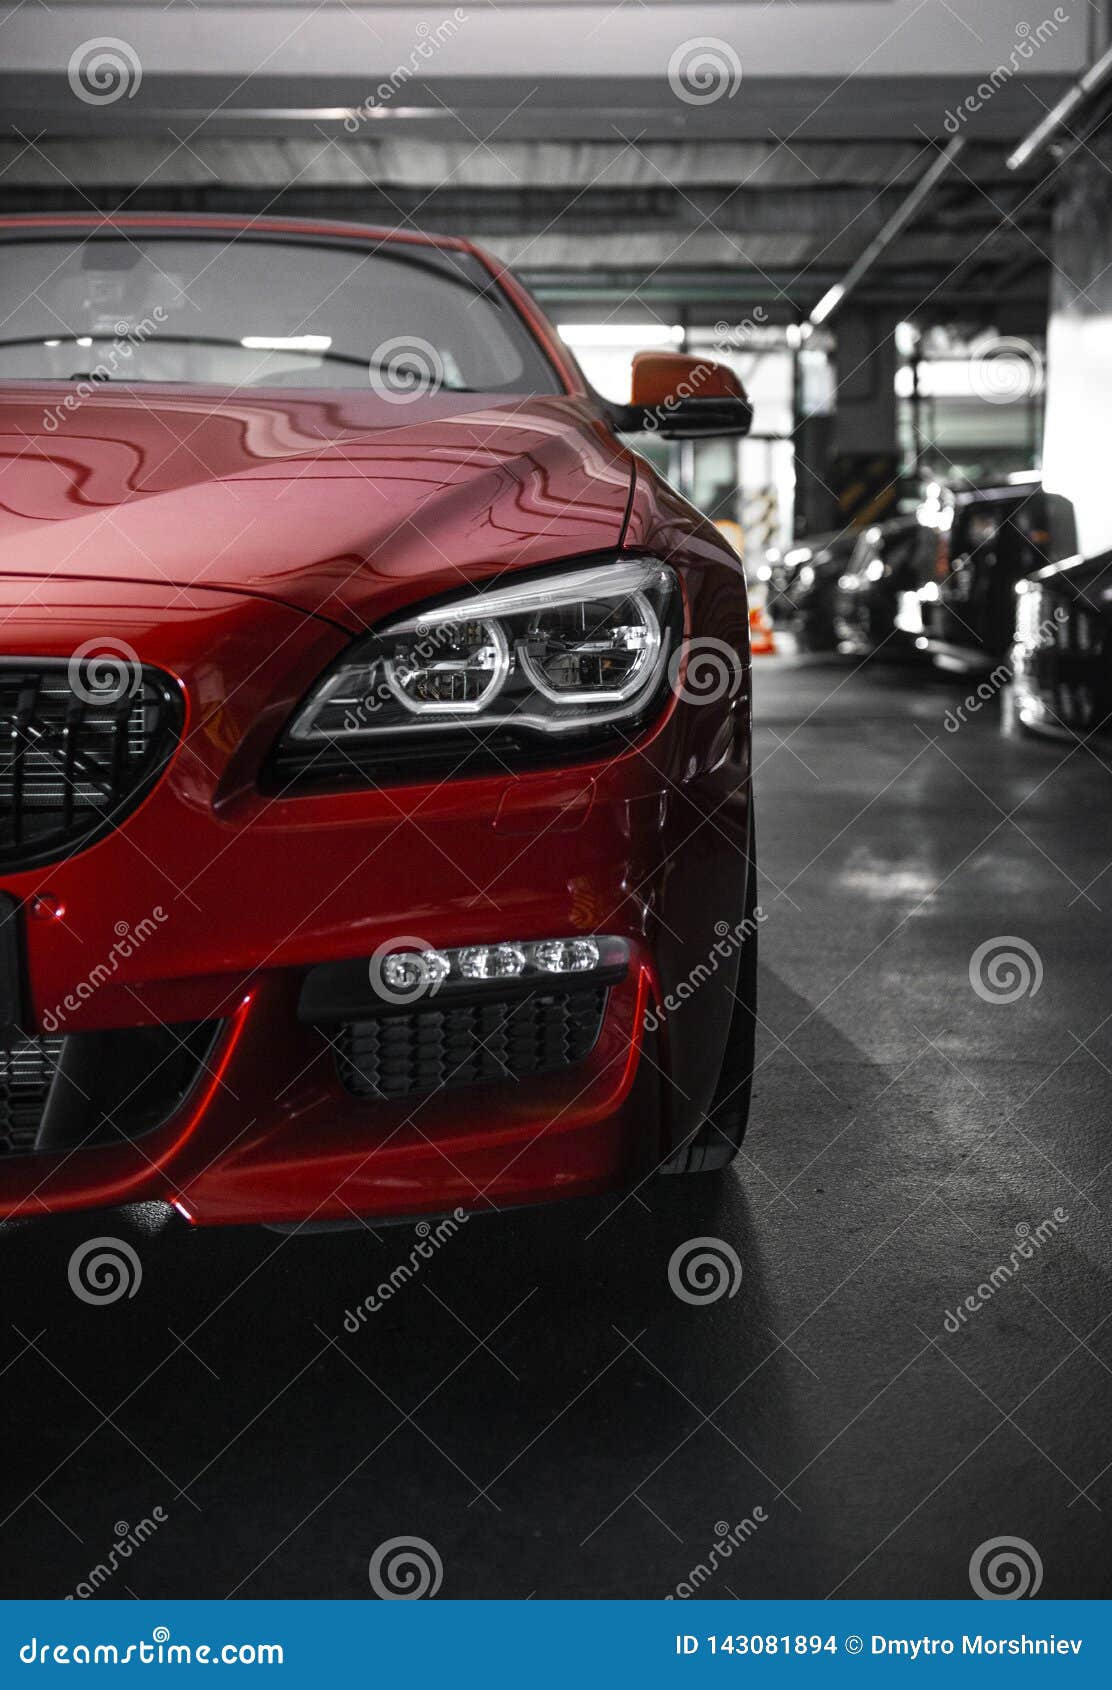 back headlight of a modern luxury red car, auto detail, car care concept in the garage